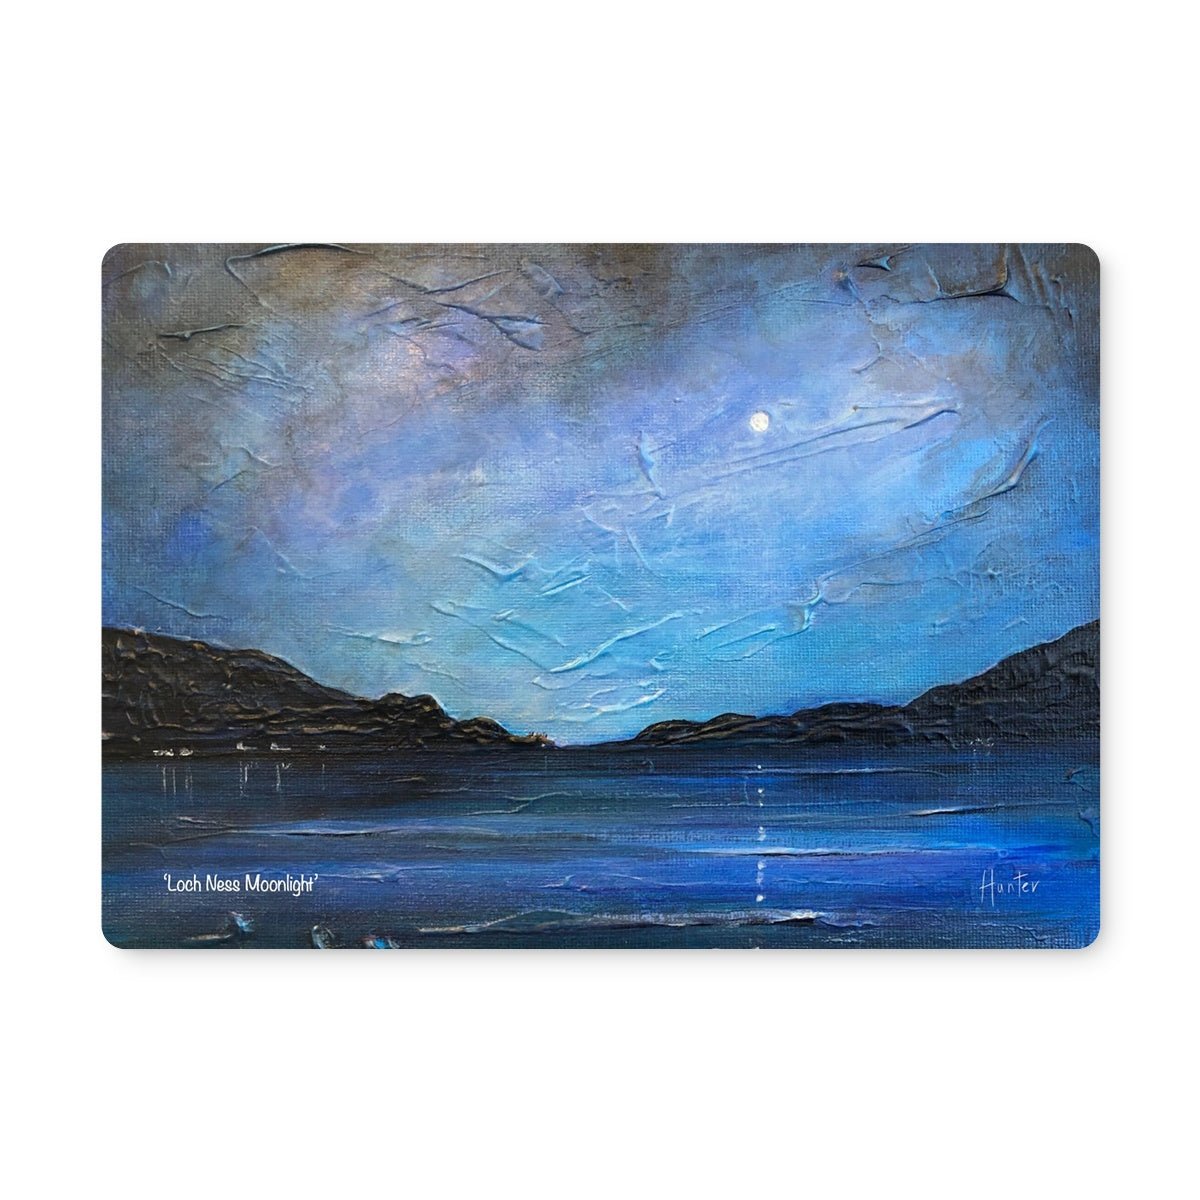 Loch Ness Moonlight Art Gifts Placemat-Placemats-Scottish Lochs & Mountains Art Gallery-Single Placemat-Paintings, Prints, Homeware, Art Gifts From Scotland By Scottish Artist Kevin Hunter